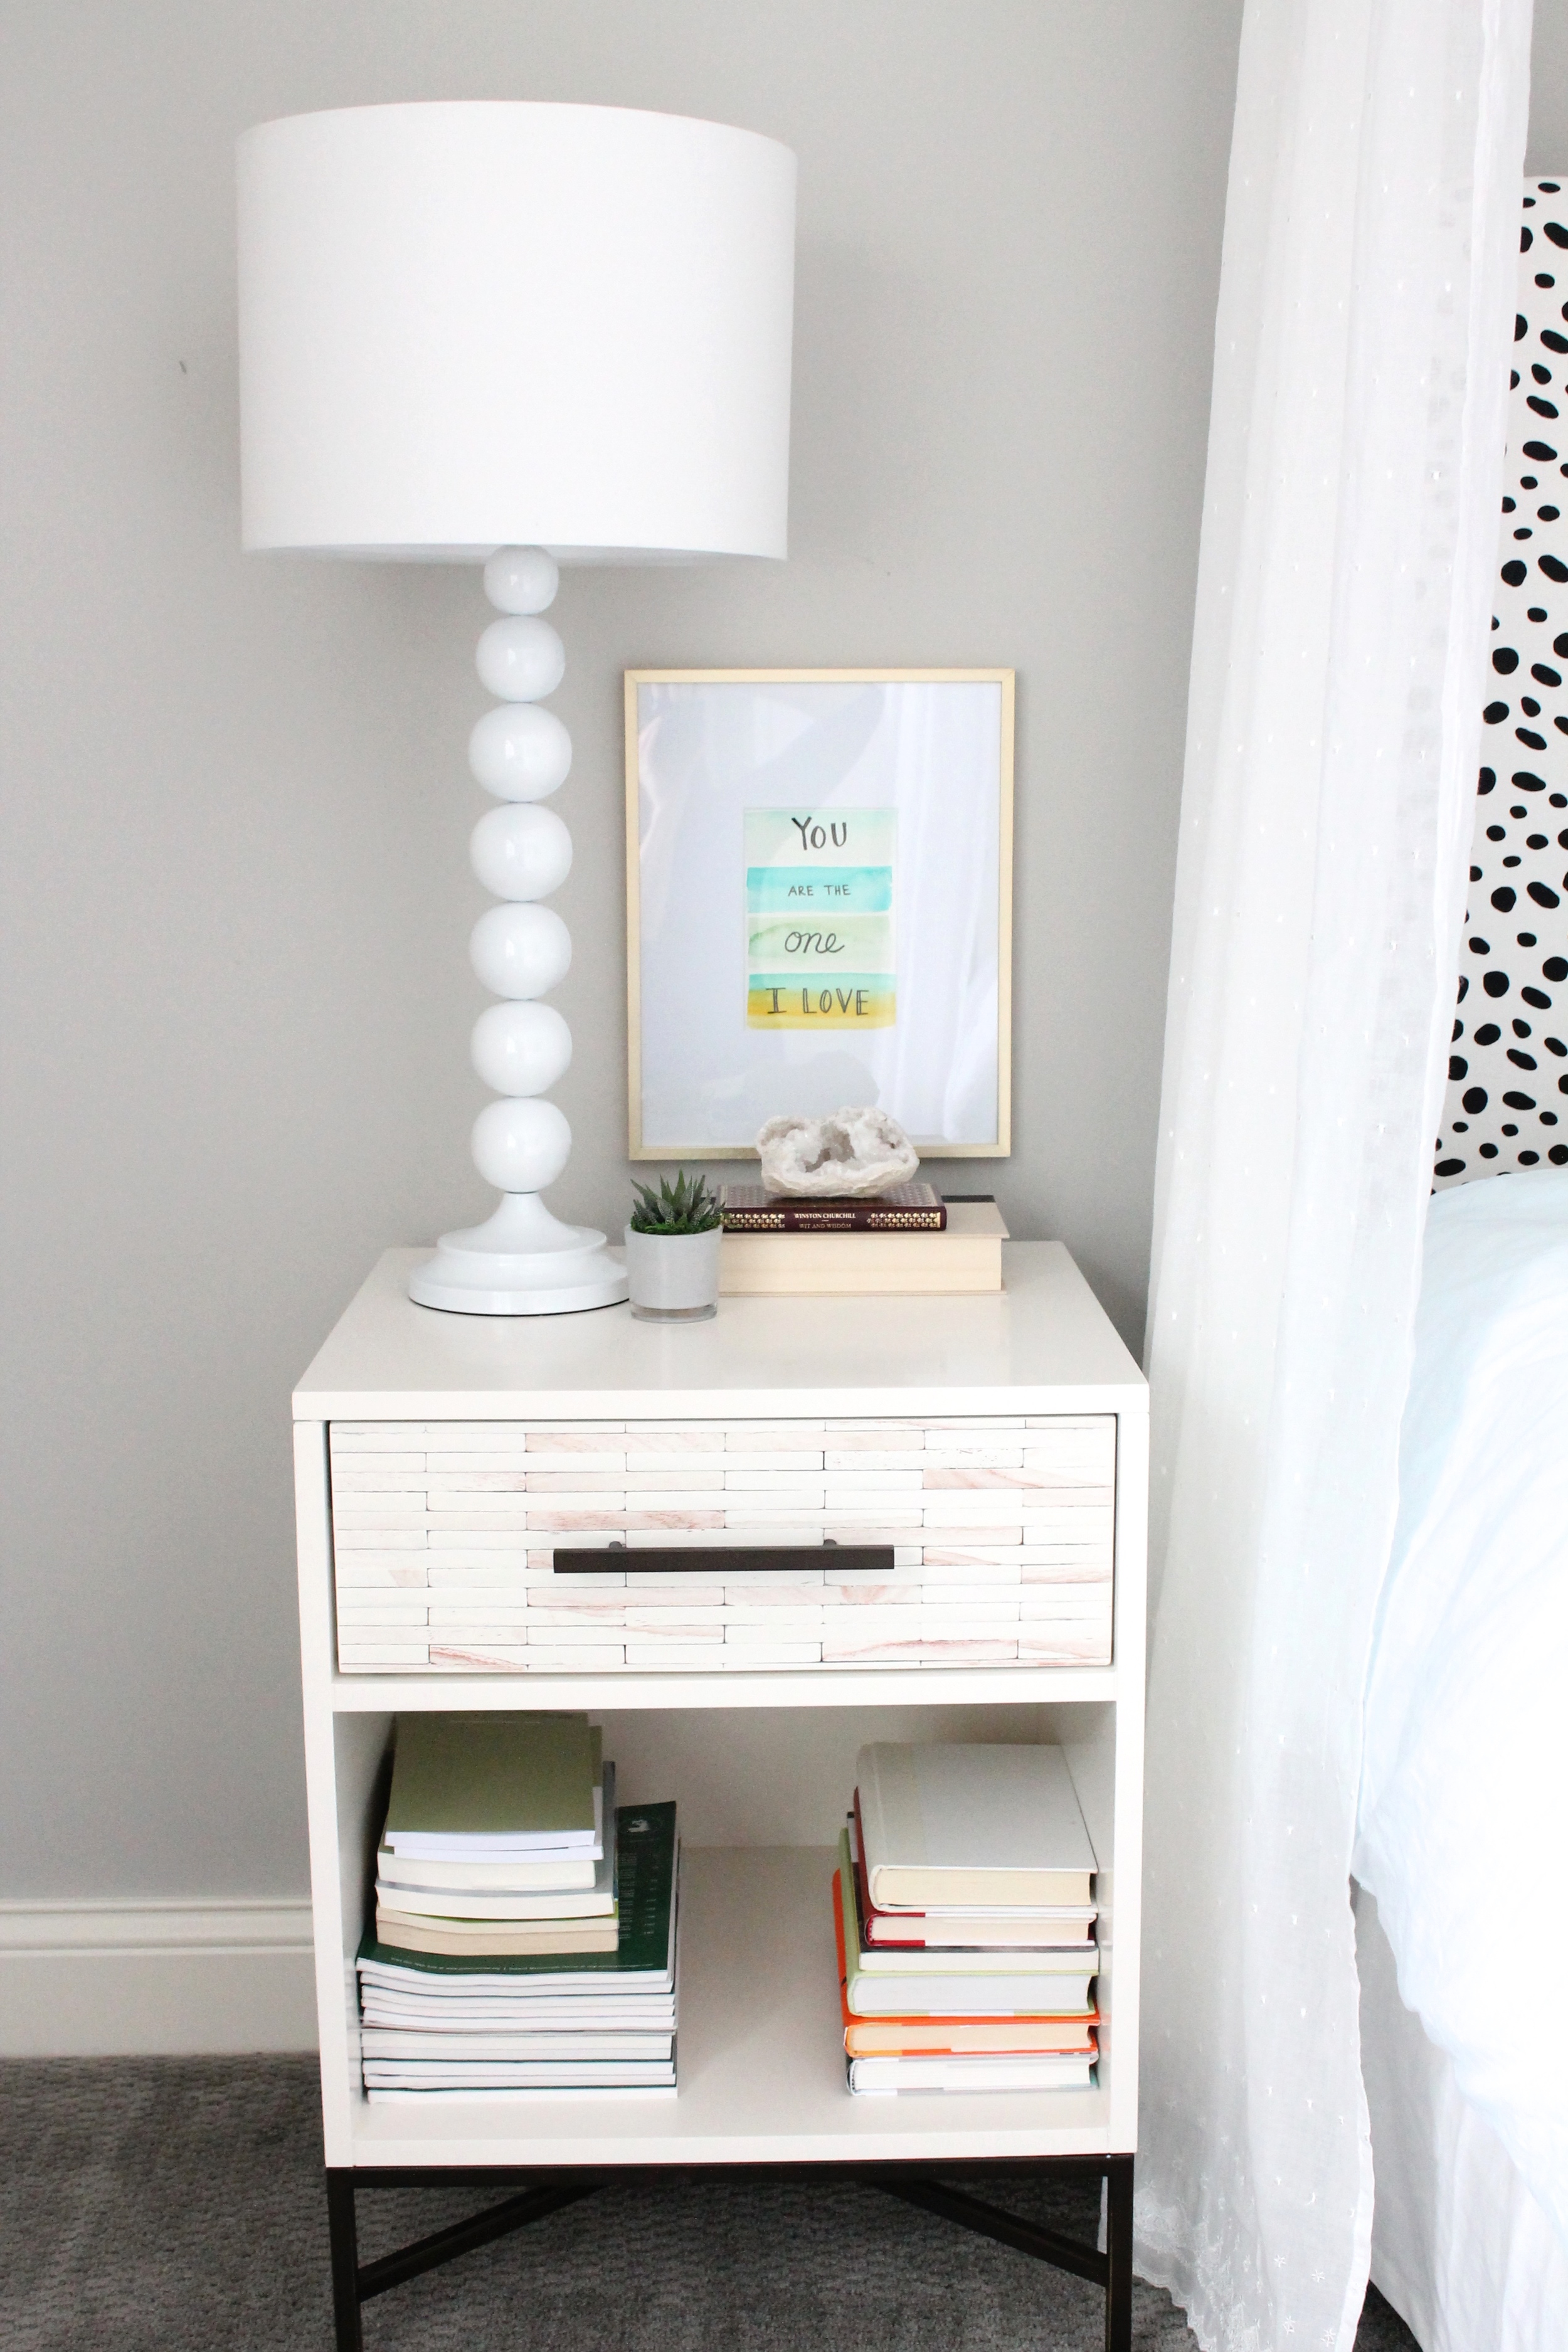 West Elm Nightstand with watercolor artwork in a gold frame. Lovely master bedroom.